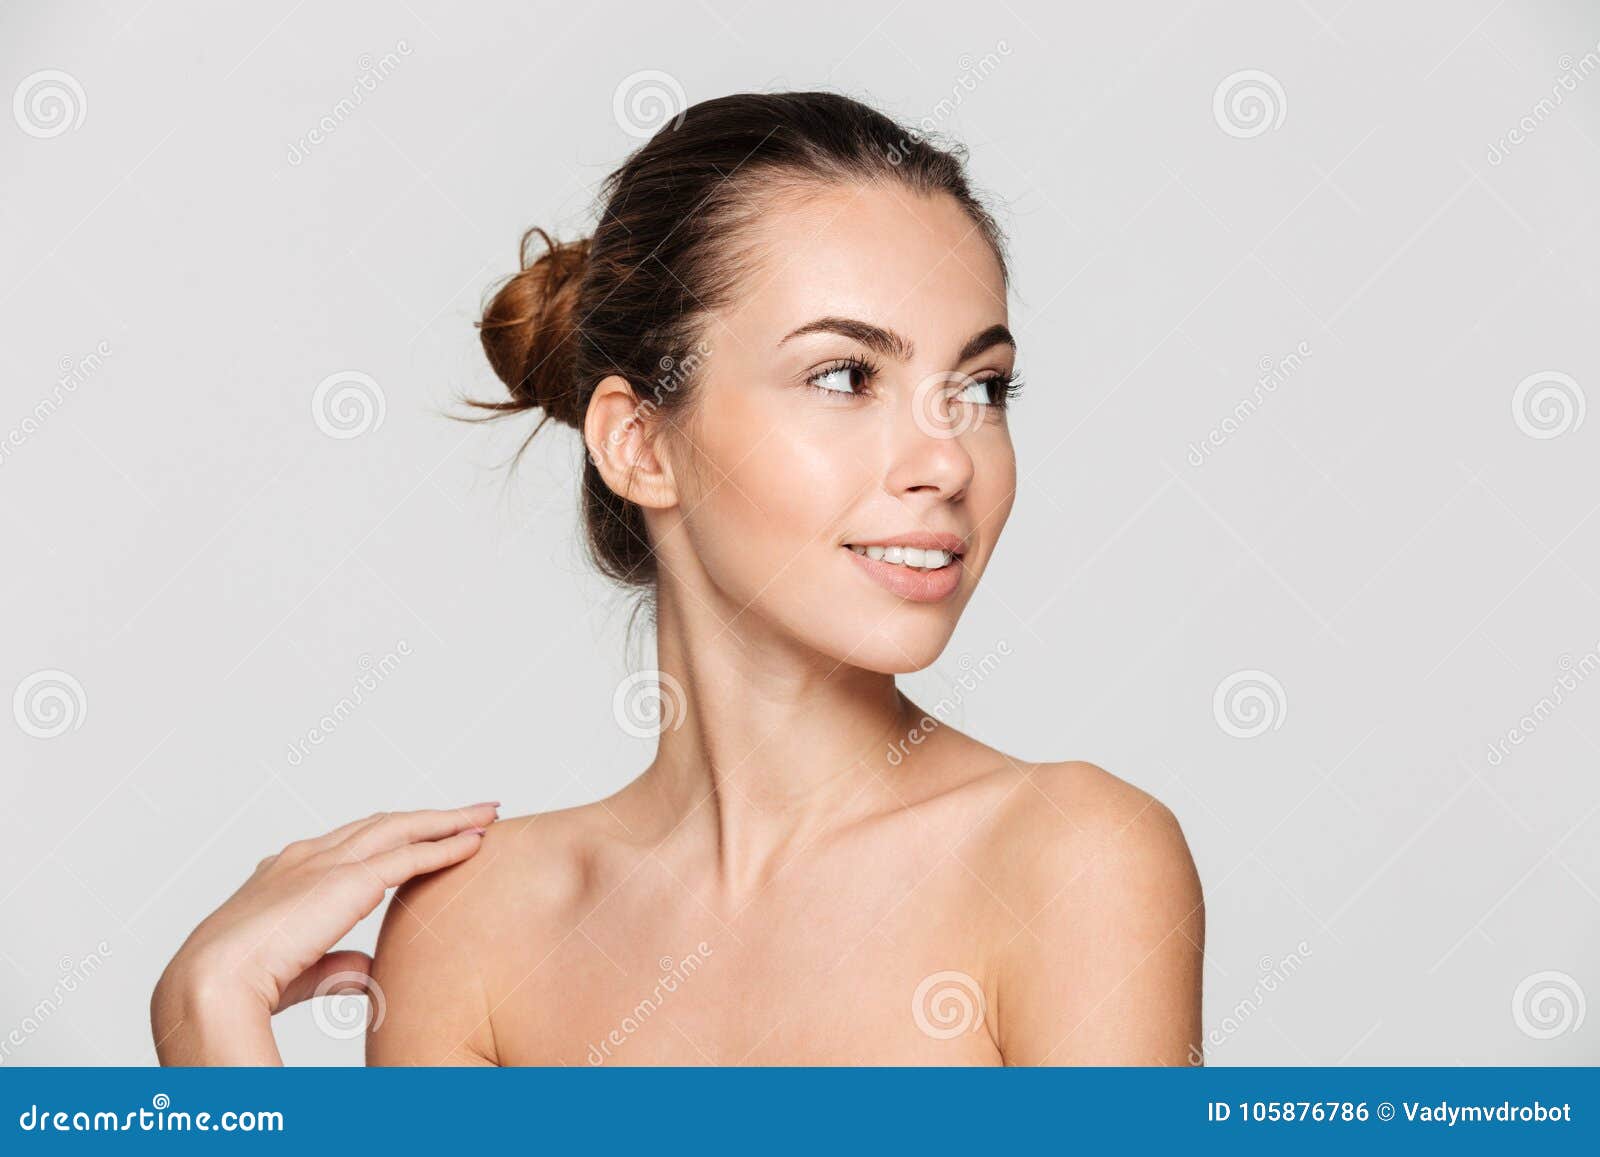 Beauty portrait of a young attractive half naked woman 